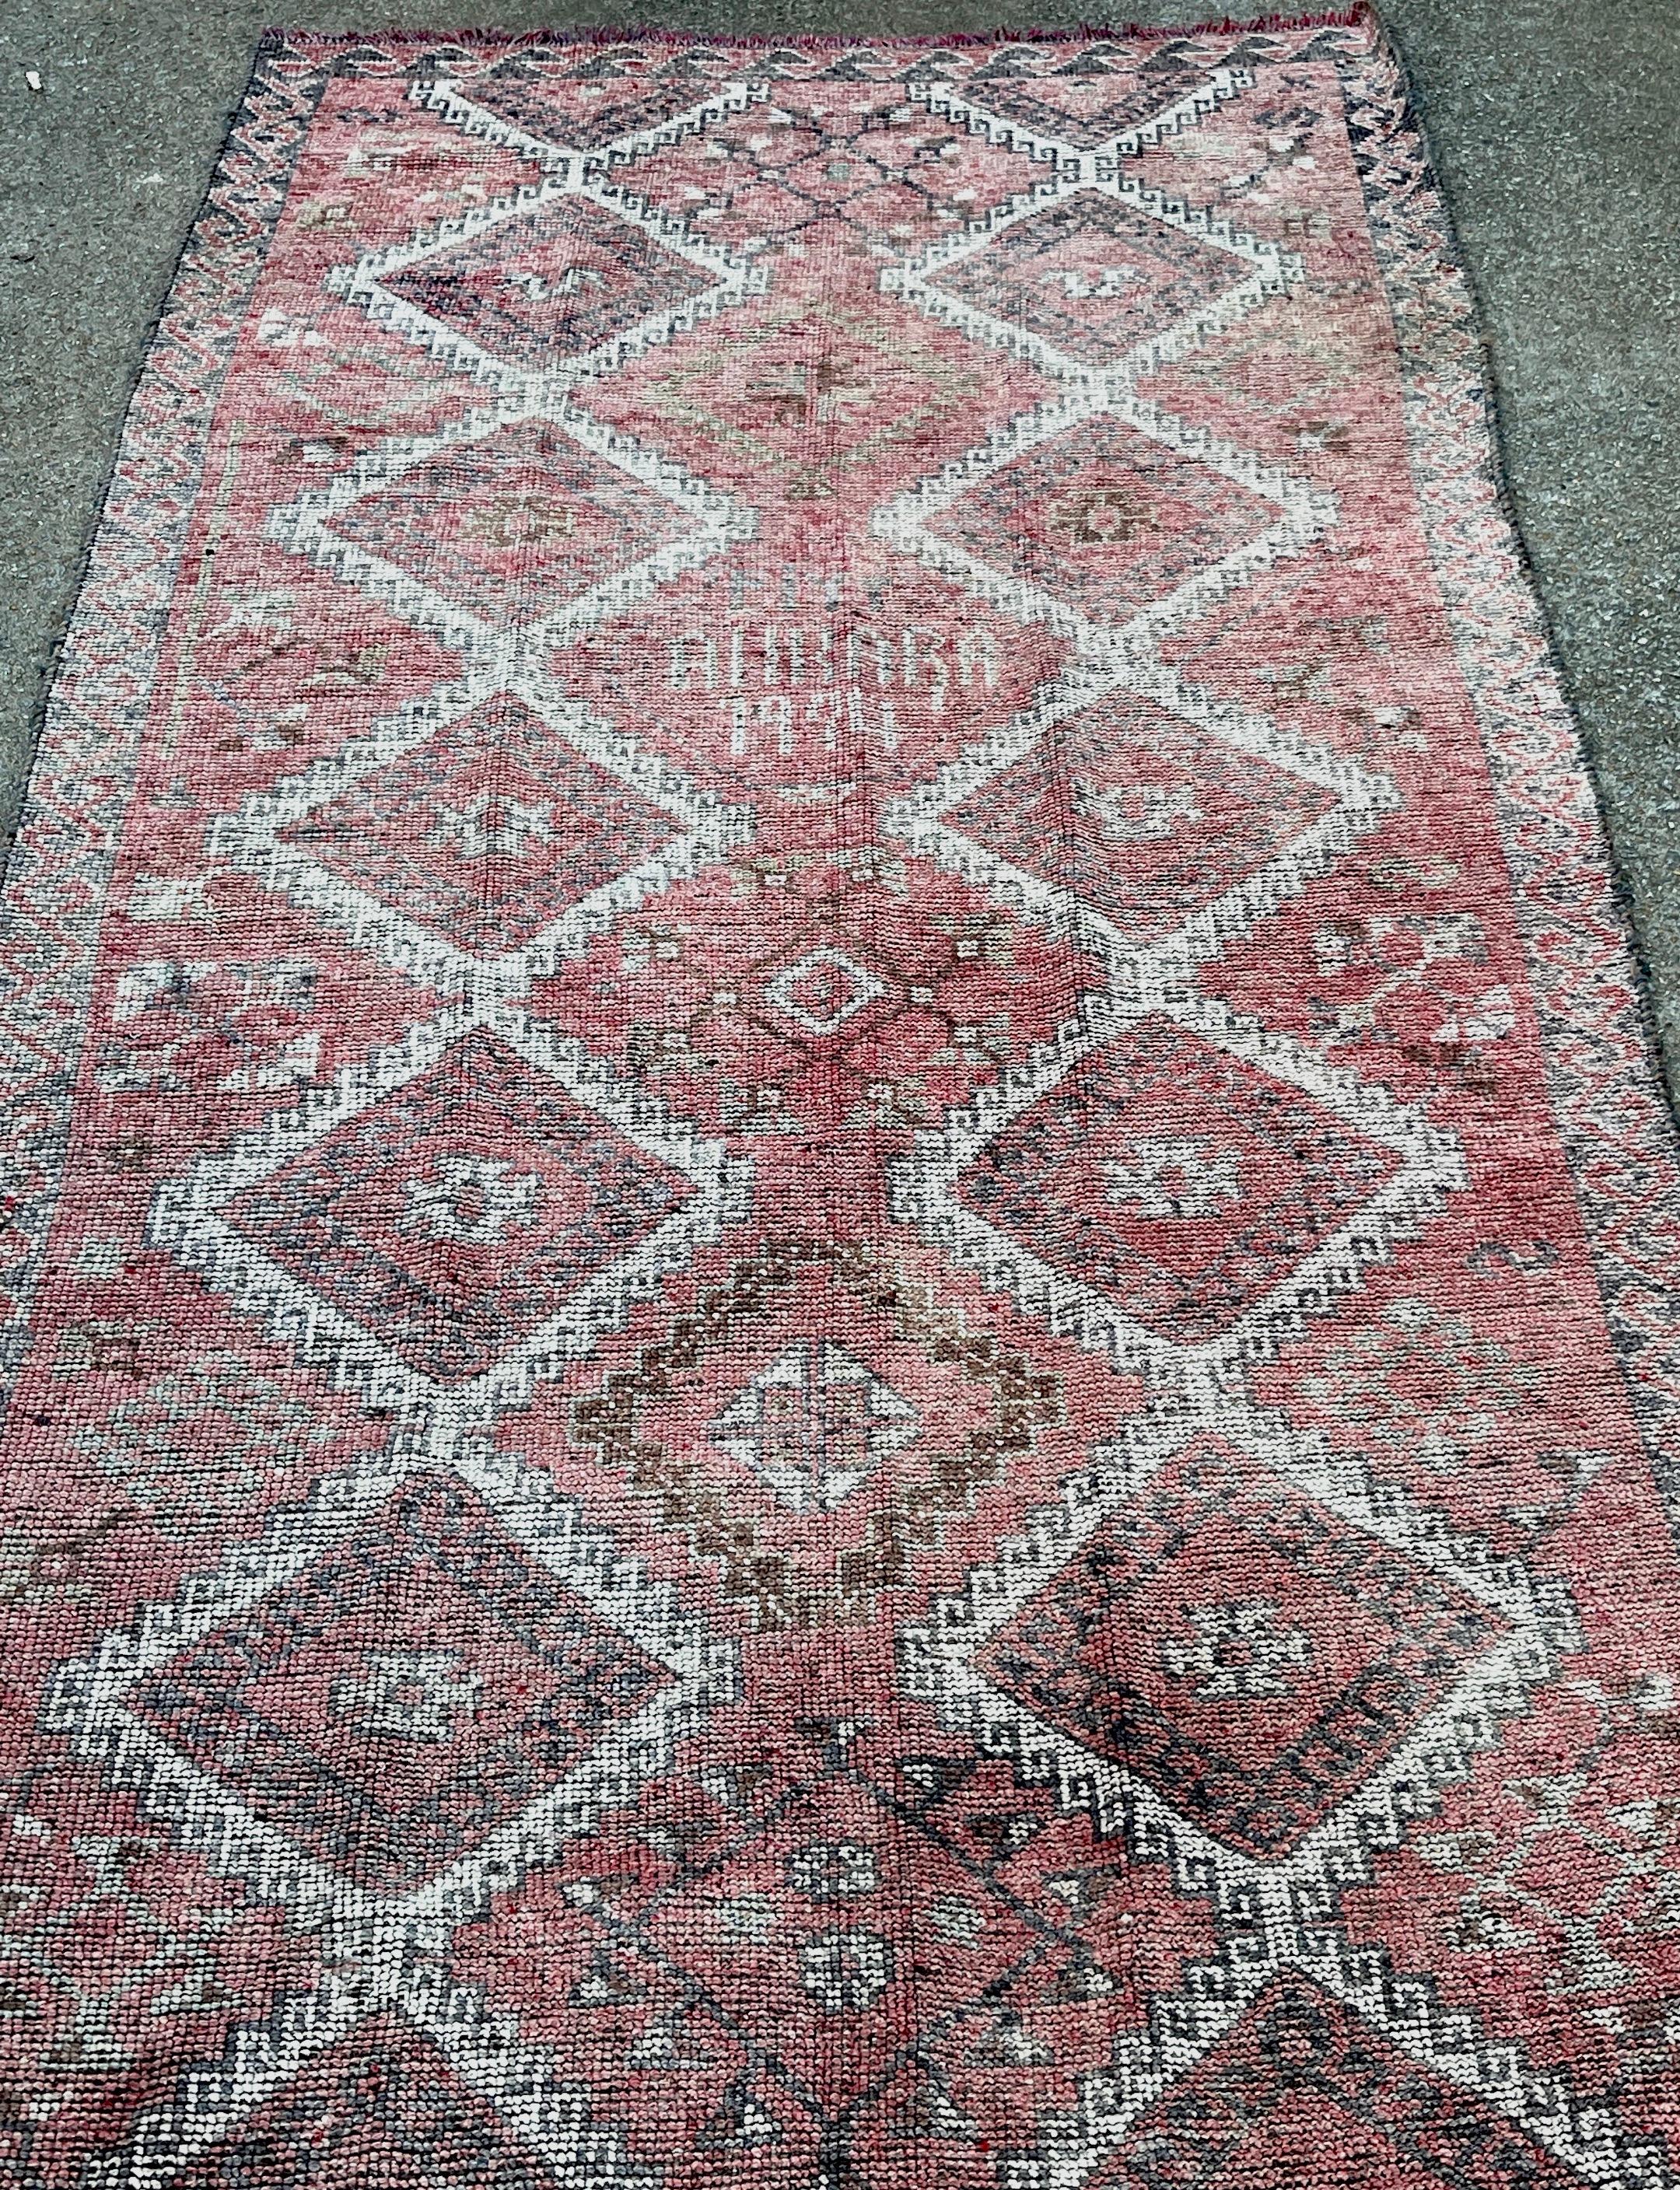 20th Century Distressed Hand-Knotted Wool Caucasian Rug 'Reservable' Signed & Dated 1994 For Sale